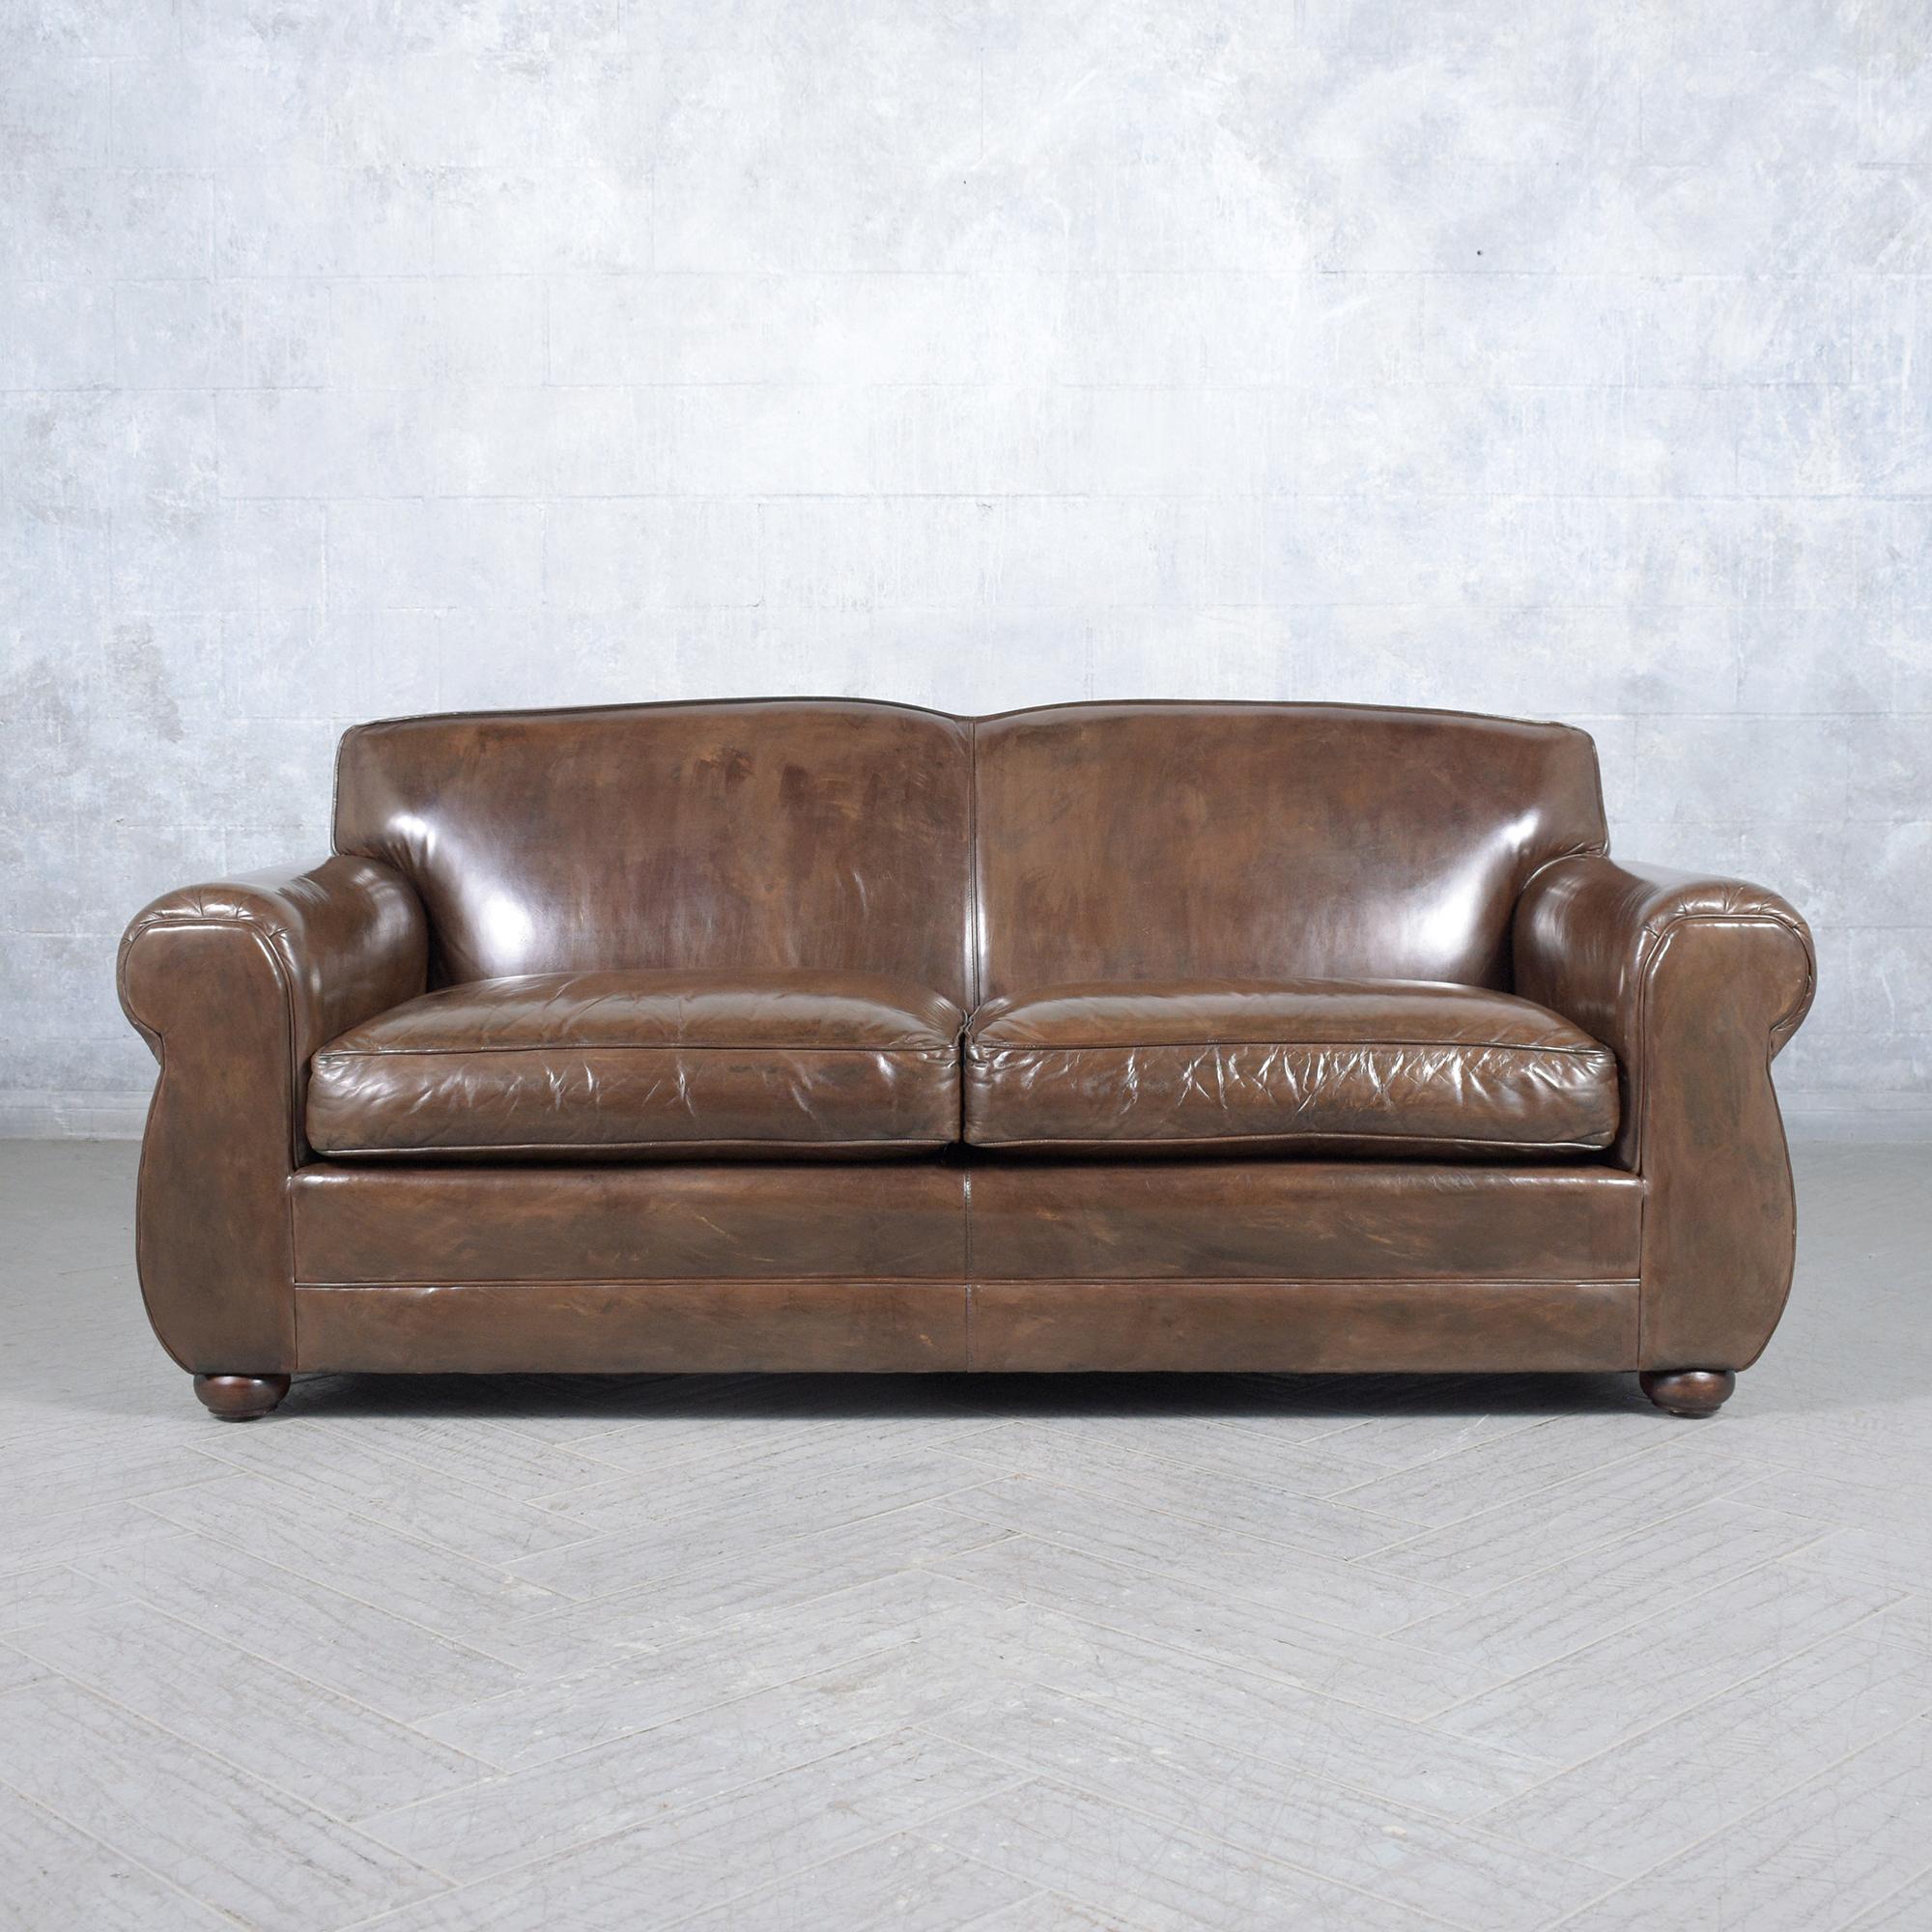 American Modern Leather Club Sofa: Timeless Elegance & Luxurious Comfort For Sale